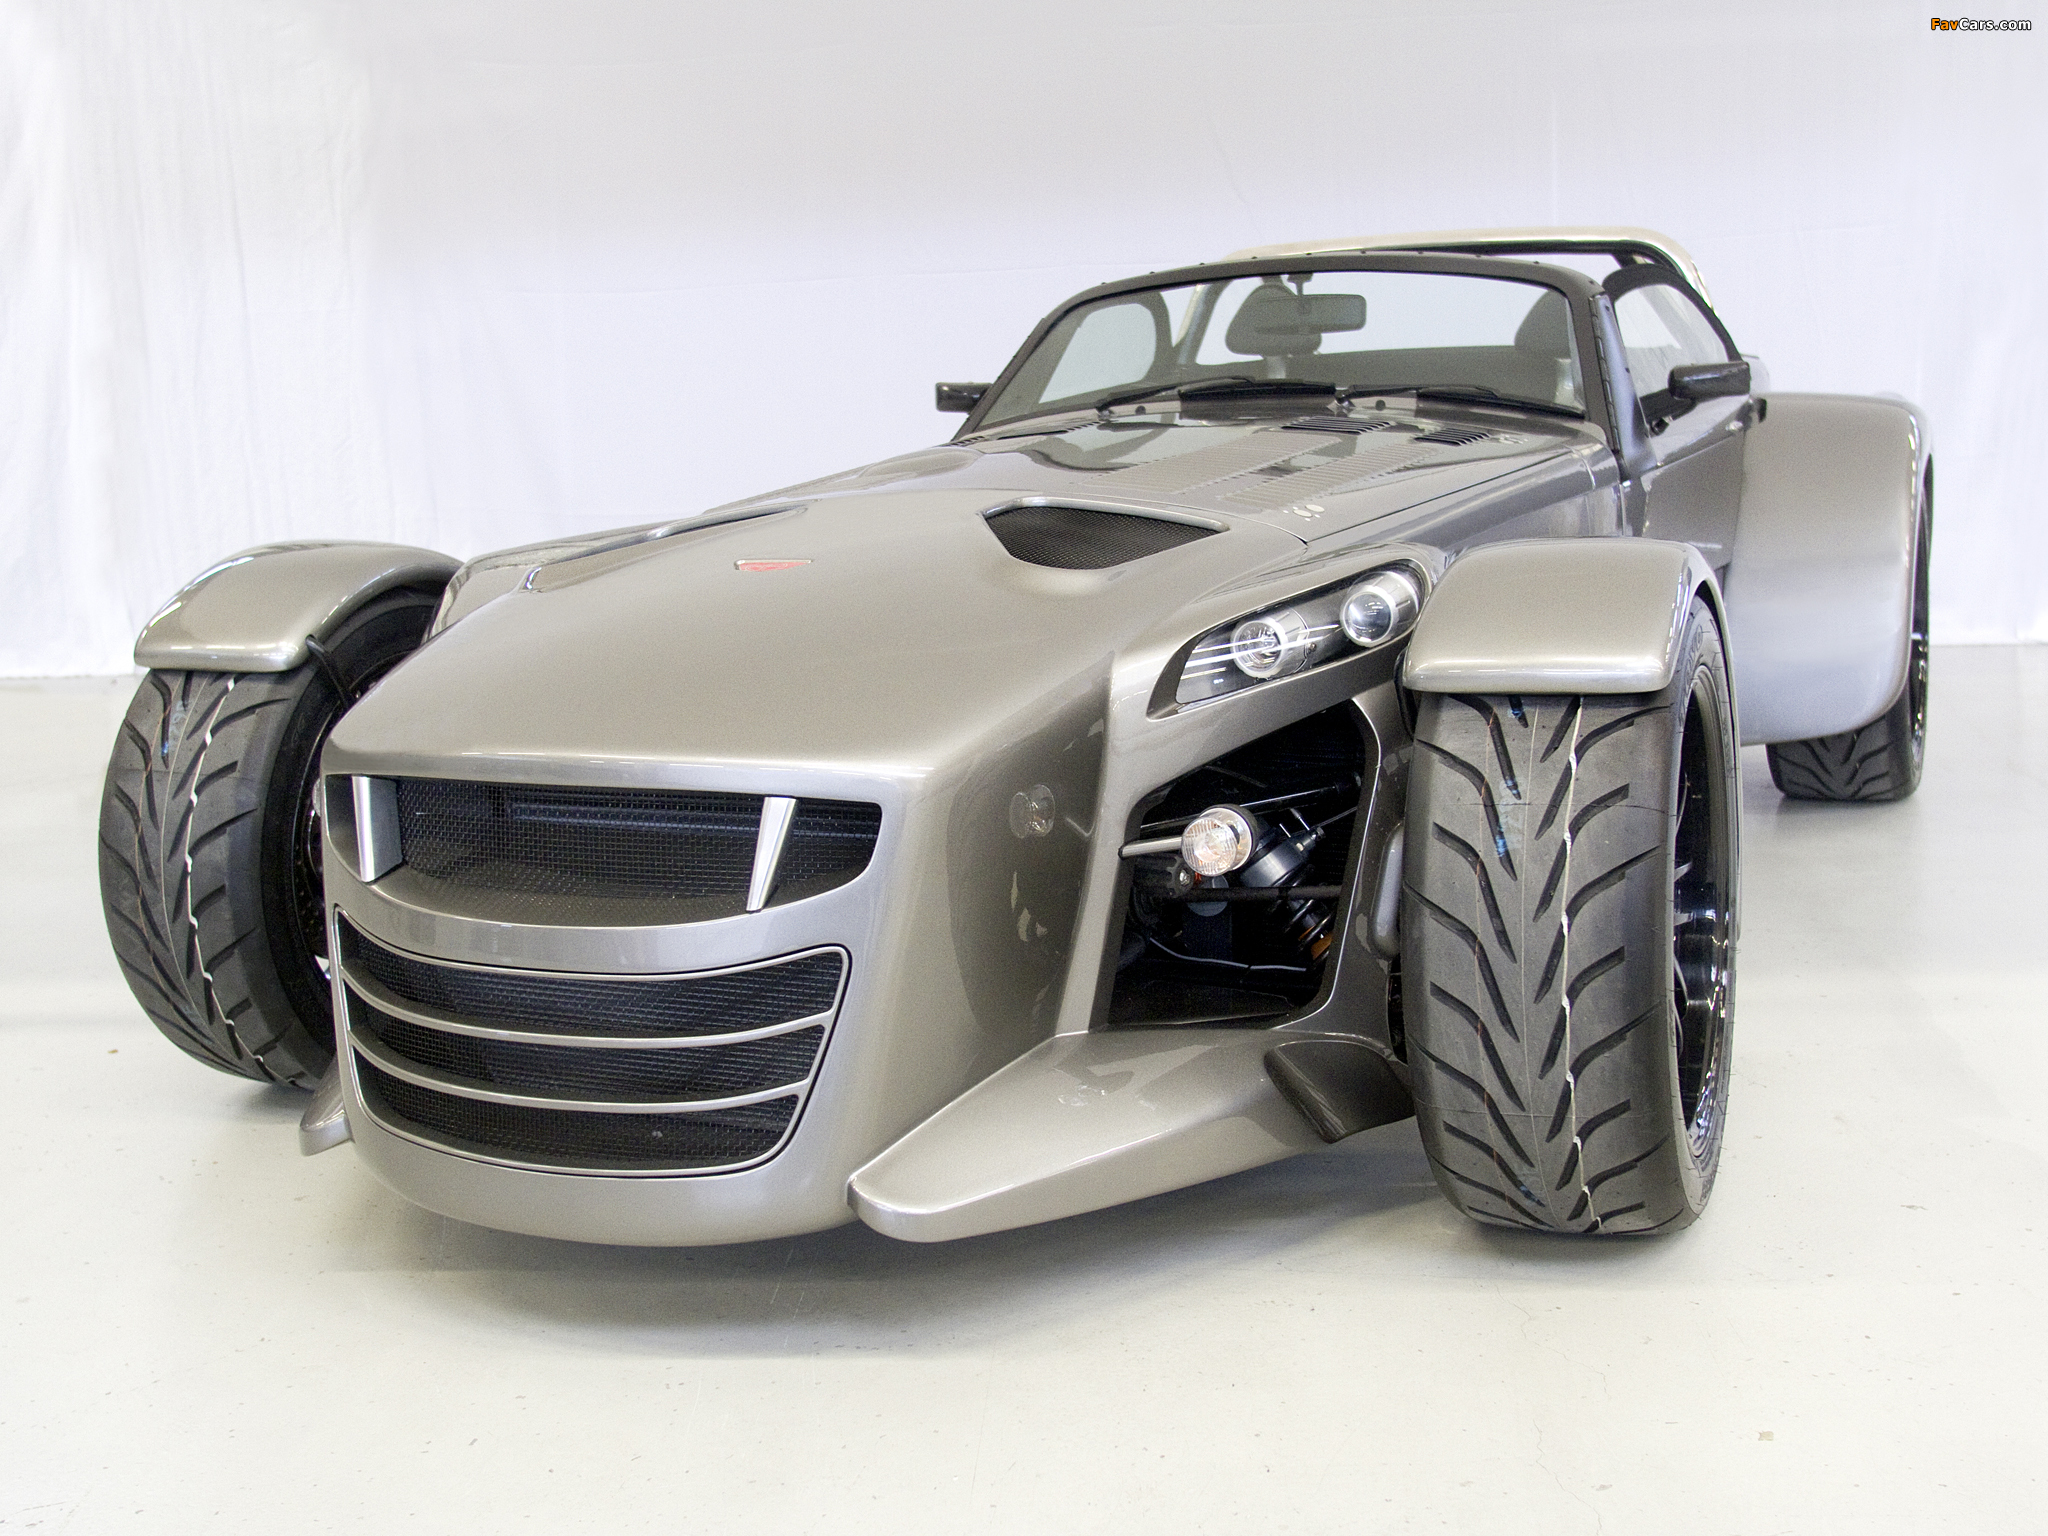 Donkervoort D8 GTO 2011 photos (2048 x 1536)